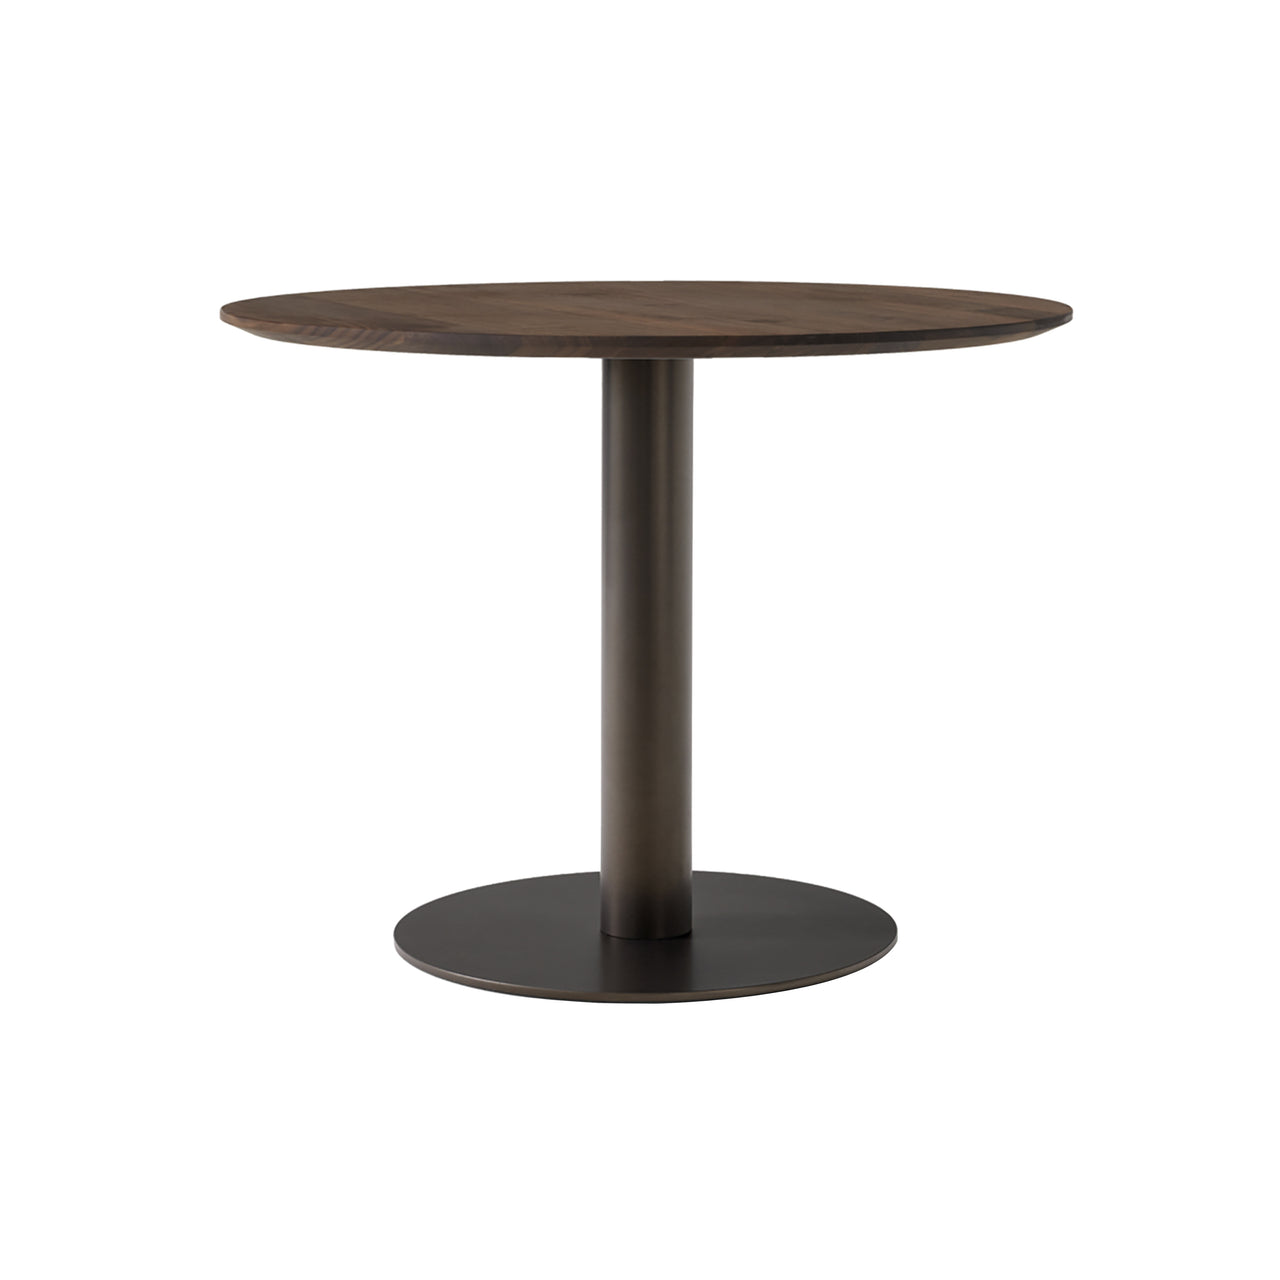 In Between Center Base Dining Table SK11 + SK12 + Small (SK11) - 35.4